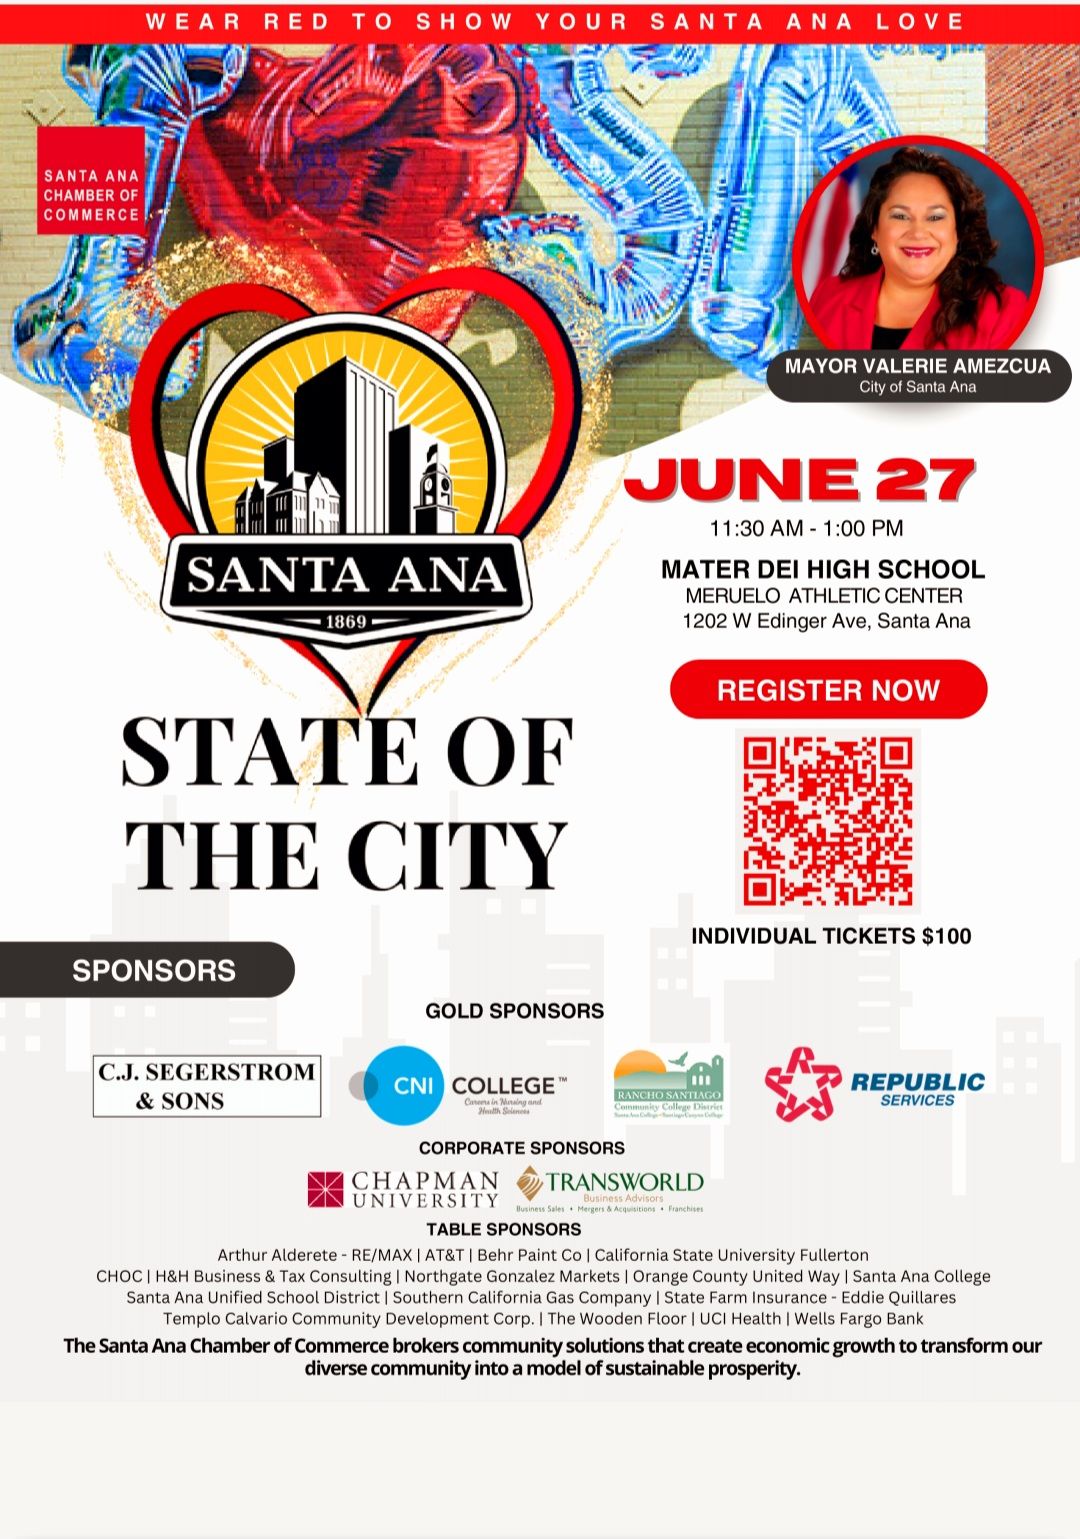 State of the City flyer